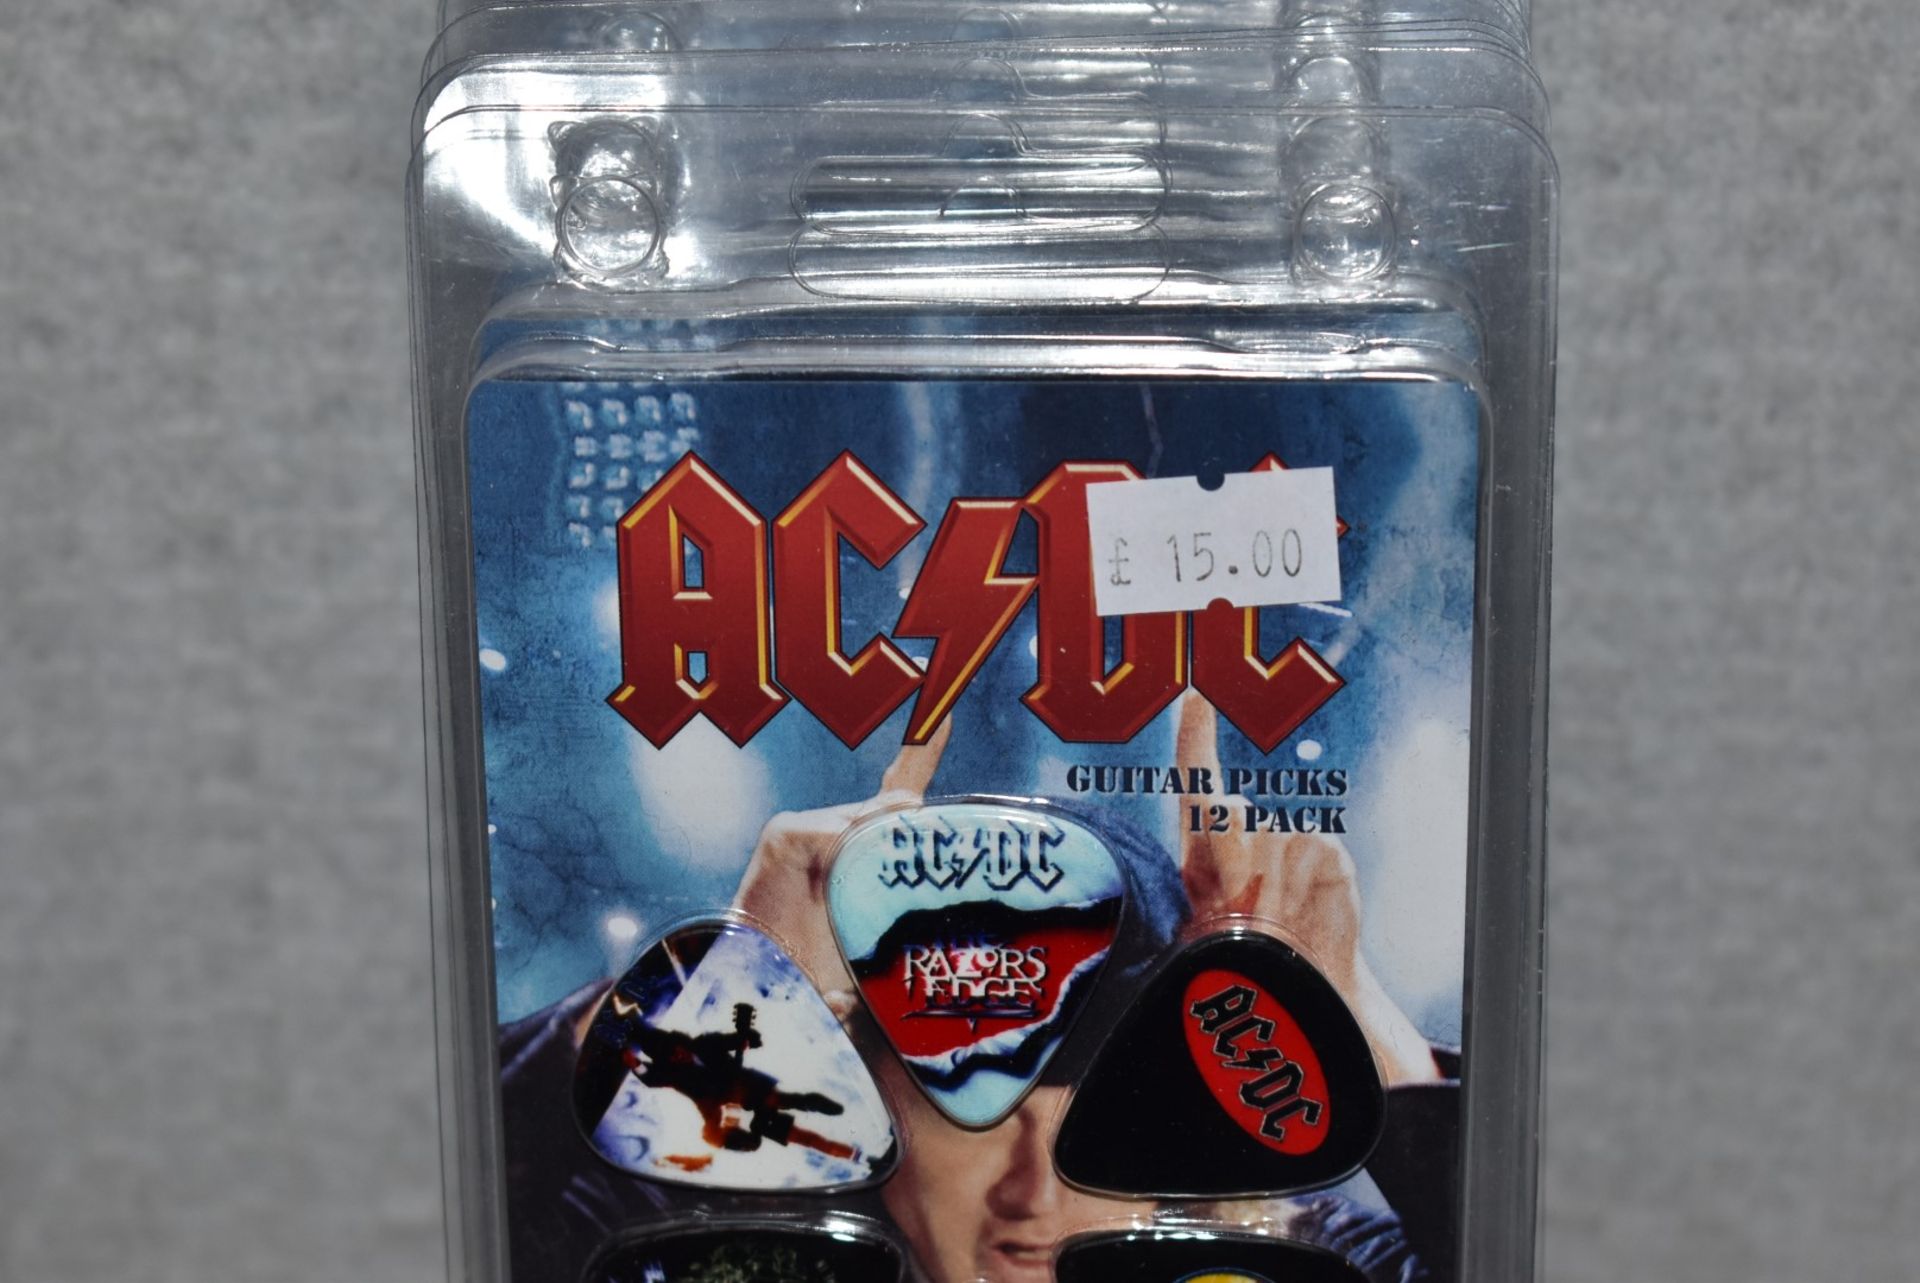 10 x ACDC Guitar Pick Multipacks By Perri's - 6 Picks Per Pack - Officially Licensed Merchandise - - Image 6 of 8